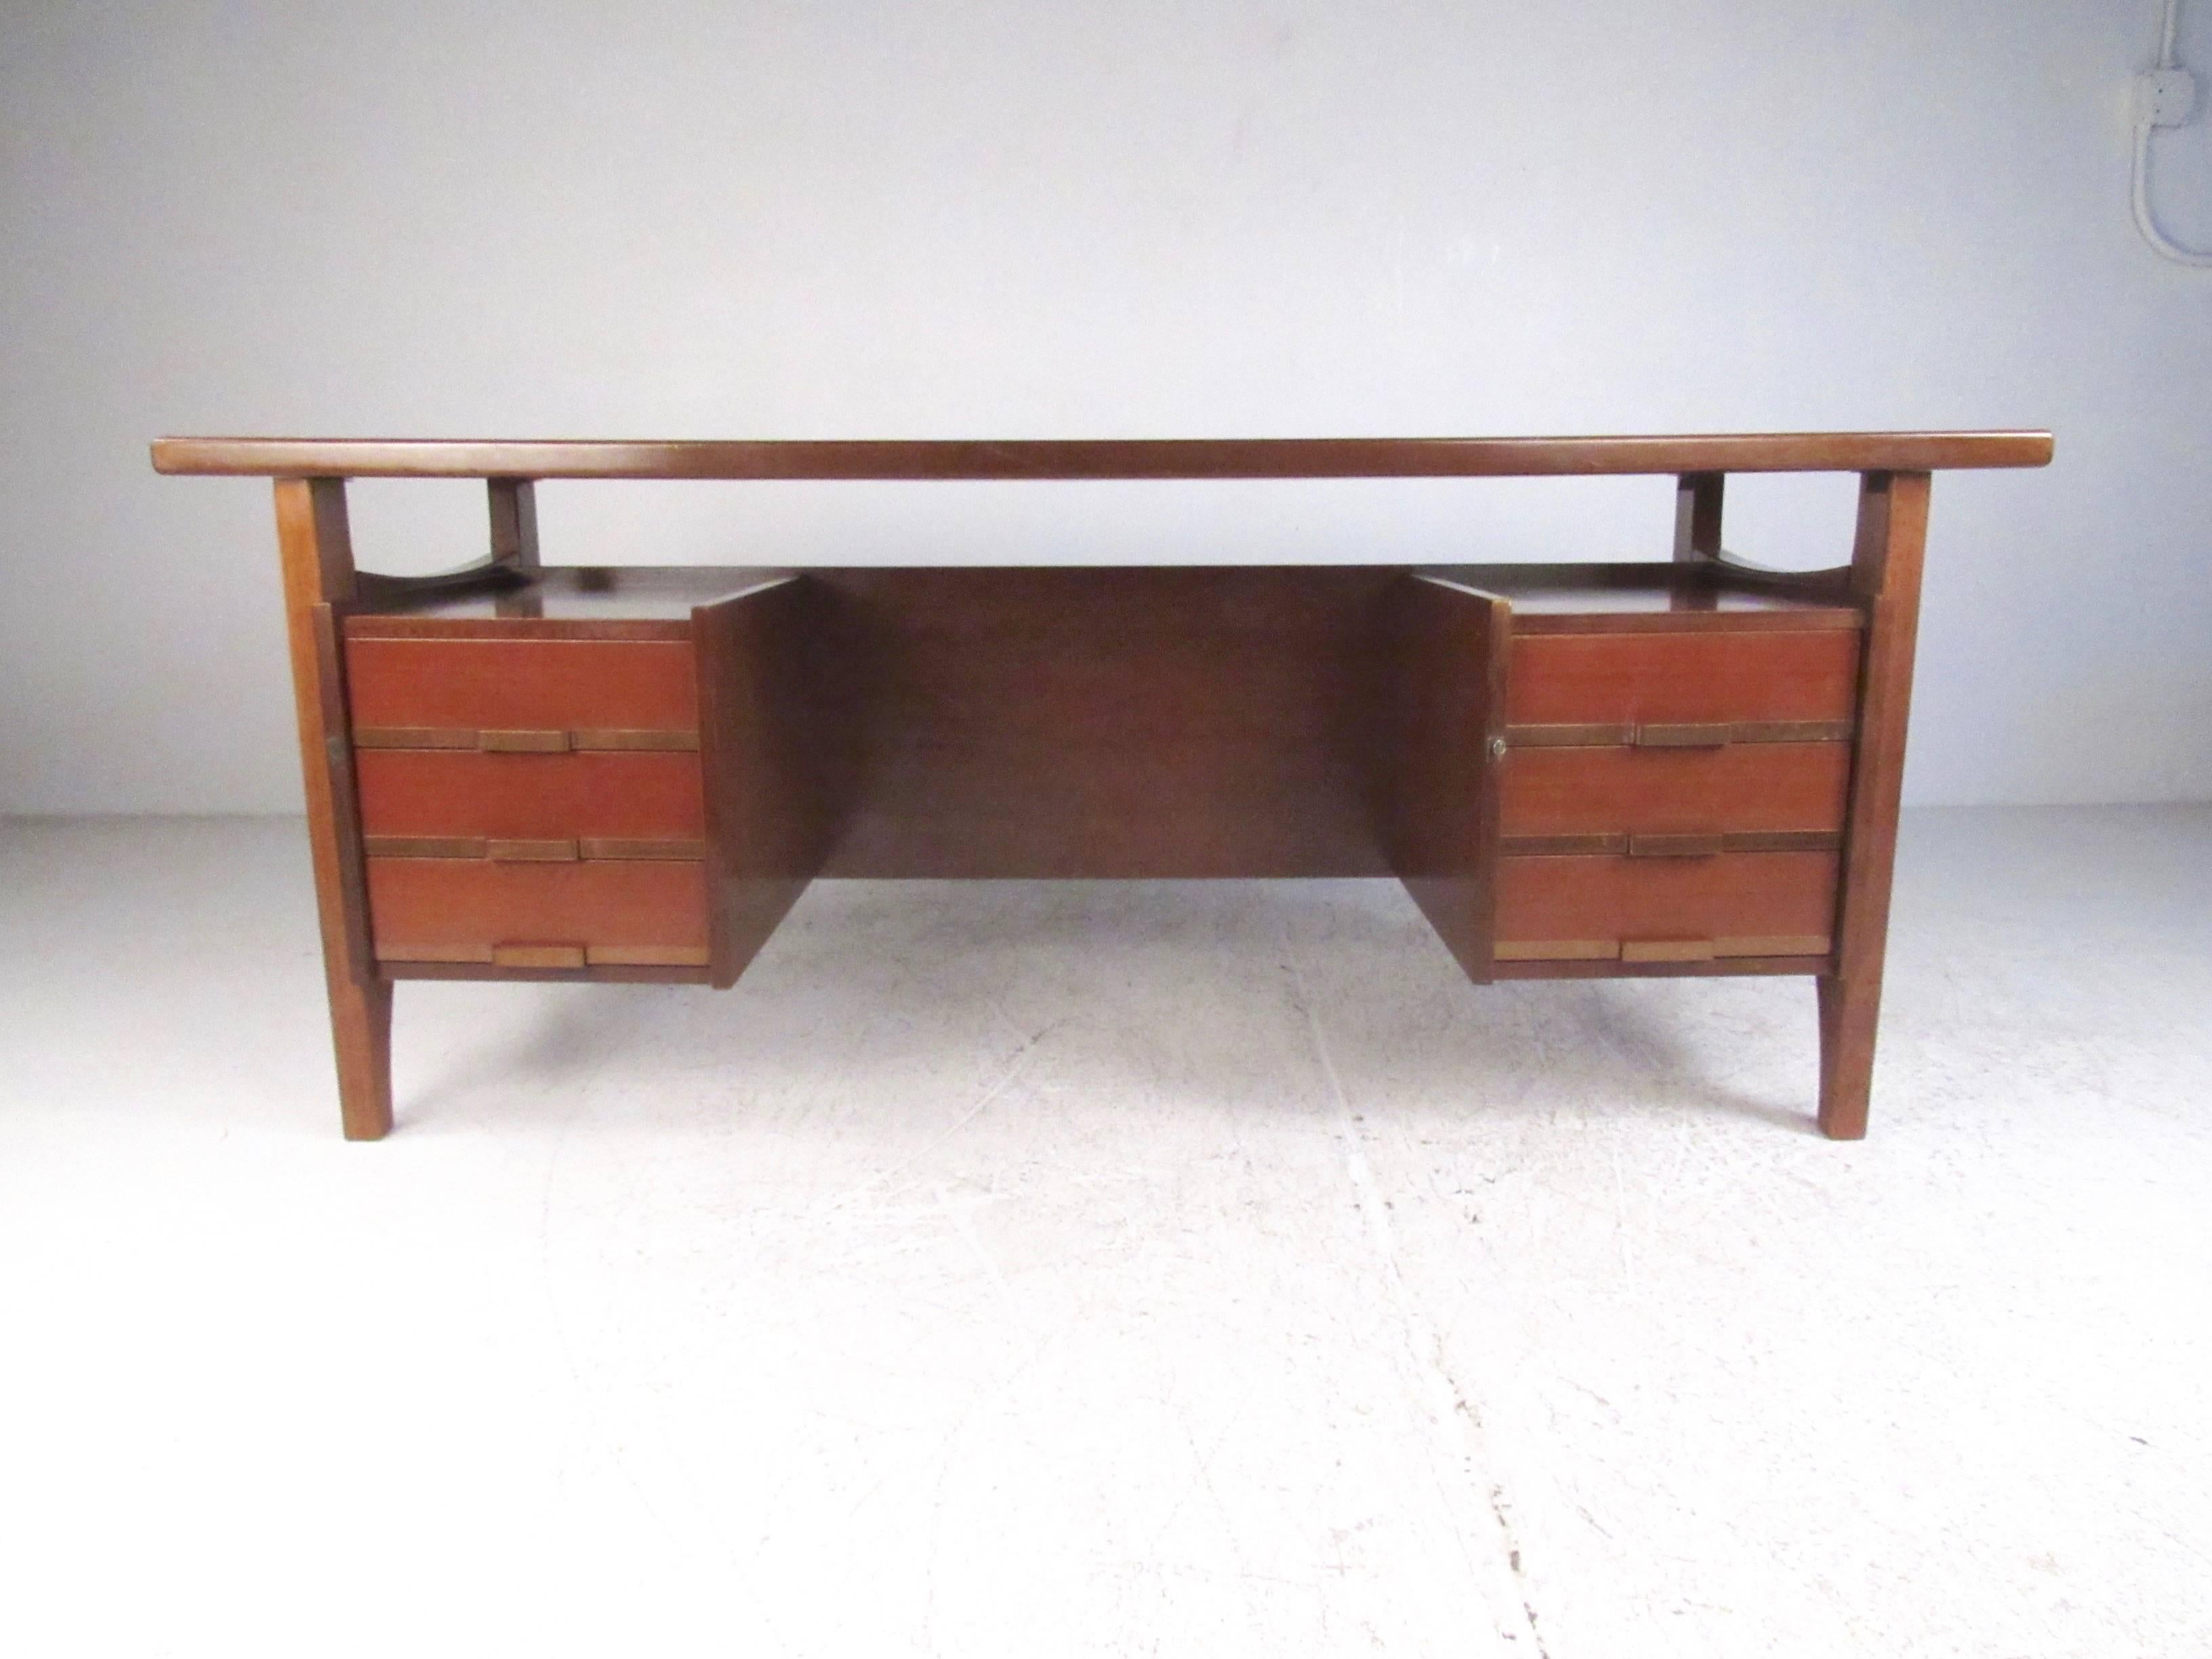 This exquisite mid-century Italian desk by Schirolli features stunning 1960s construction with floating top design in the style of Ico Parisi. Six spacious drawers offer plenty of locking storage, while double sided design makes this Mid-Century